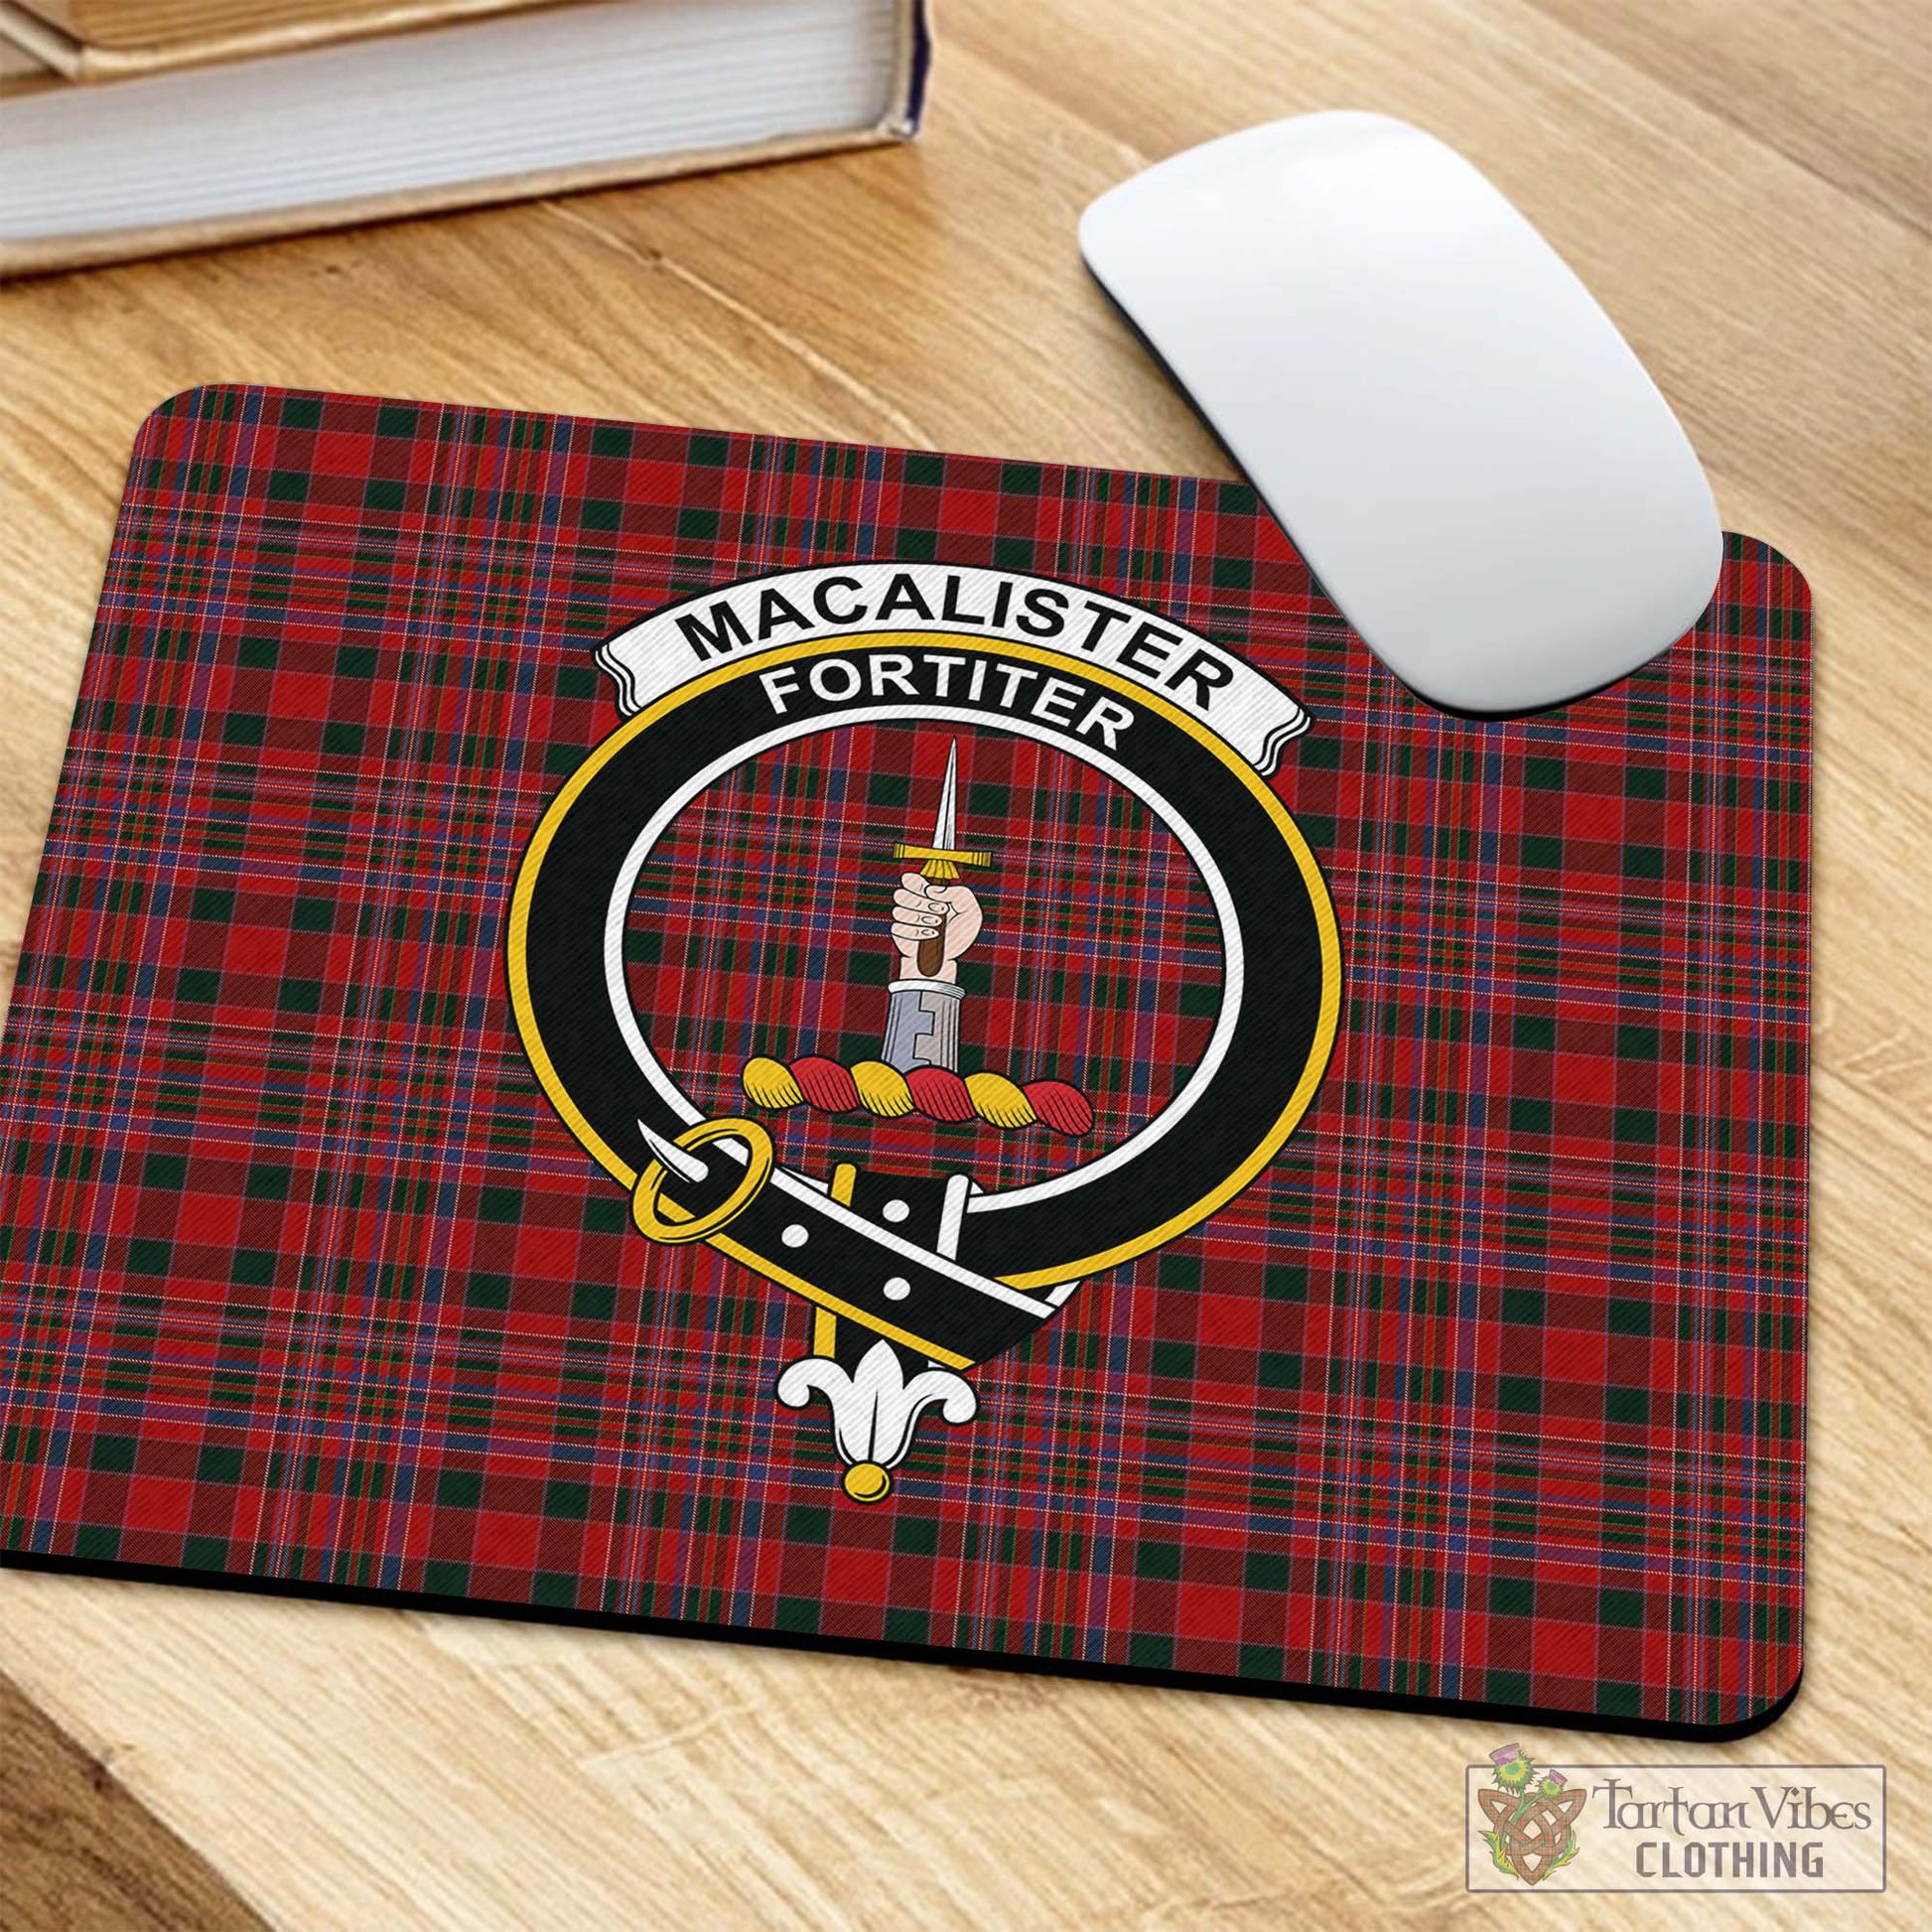 Tartan Vibes Clothing MacAlister Tartan Mouse Pad with Family Crest